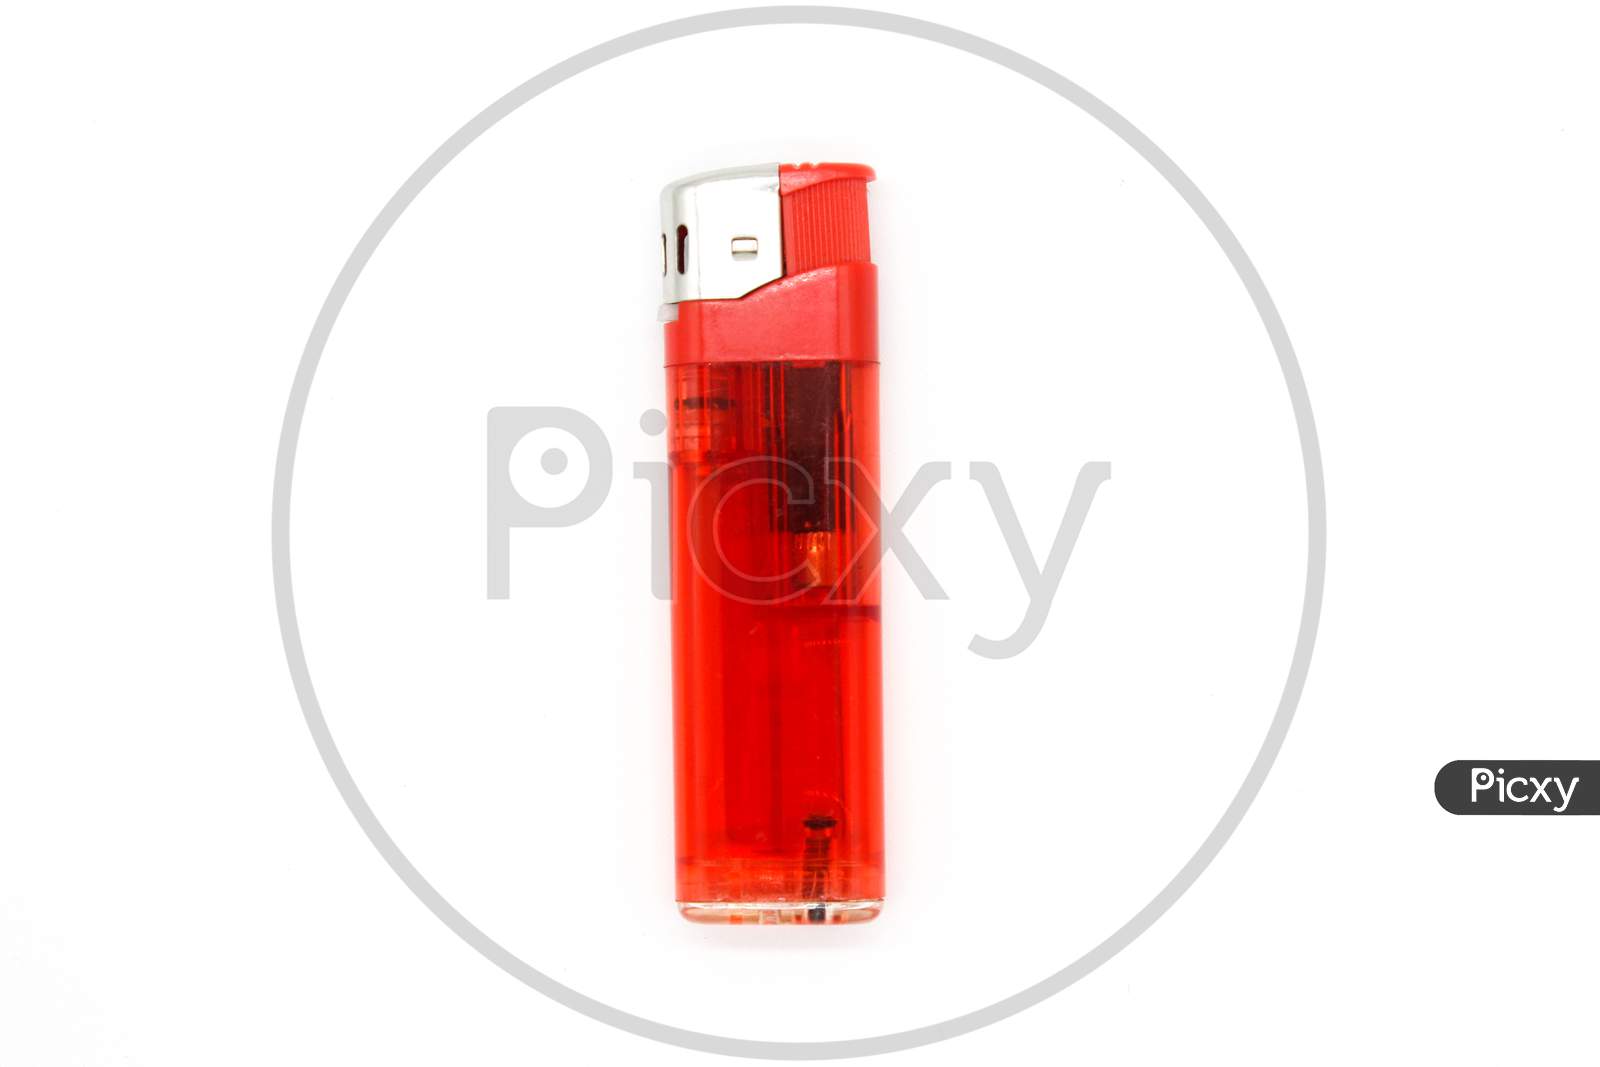 A Picture Of Cigar Lighter Isolated On White Background